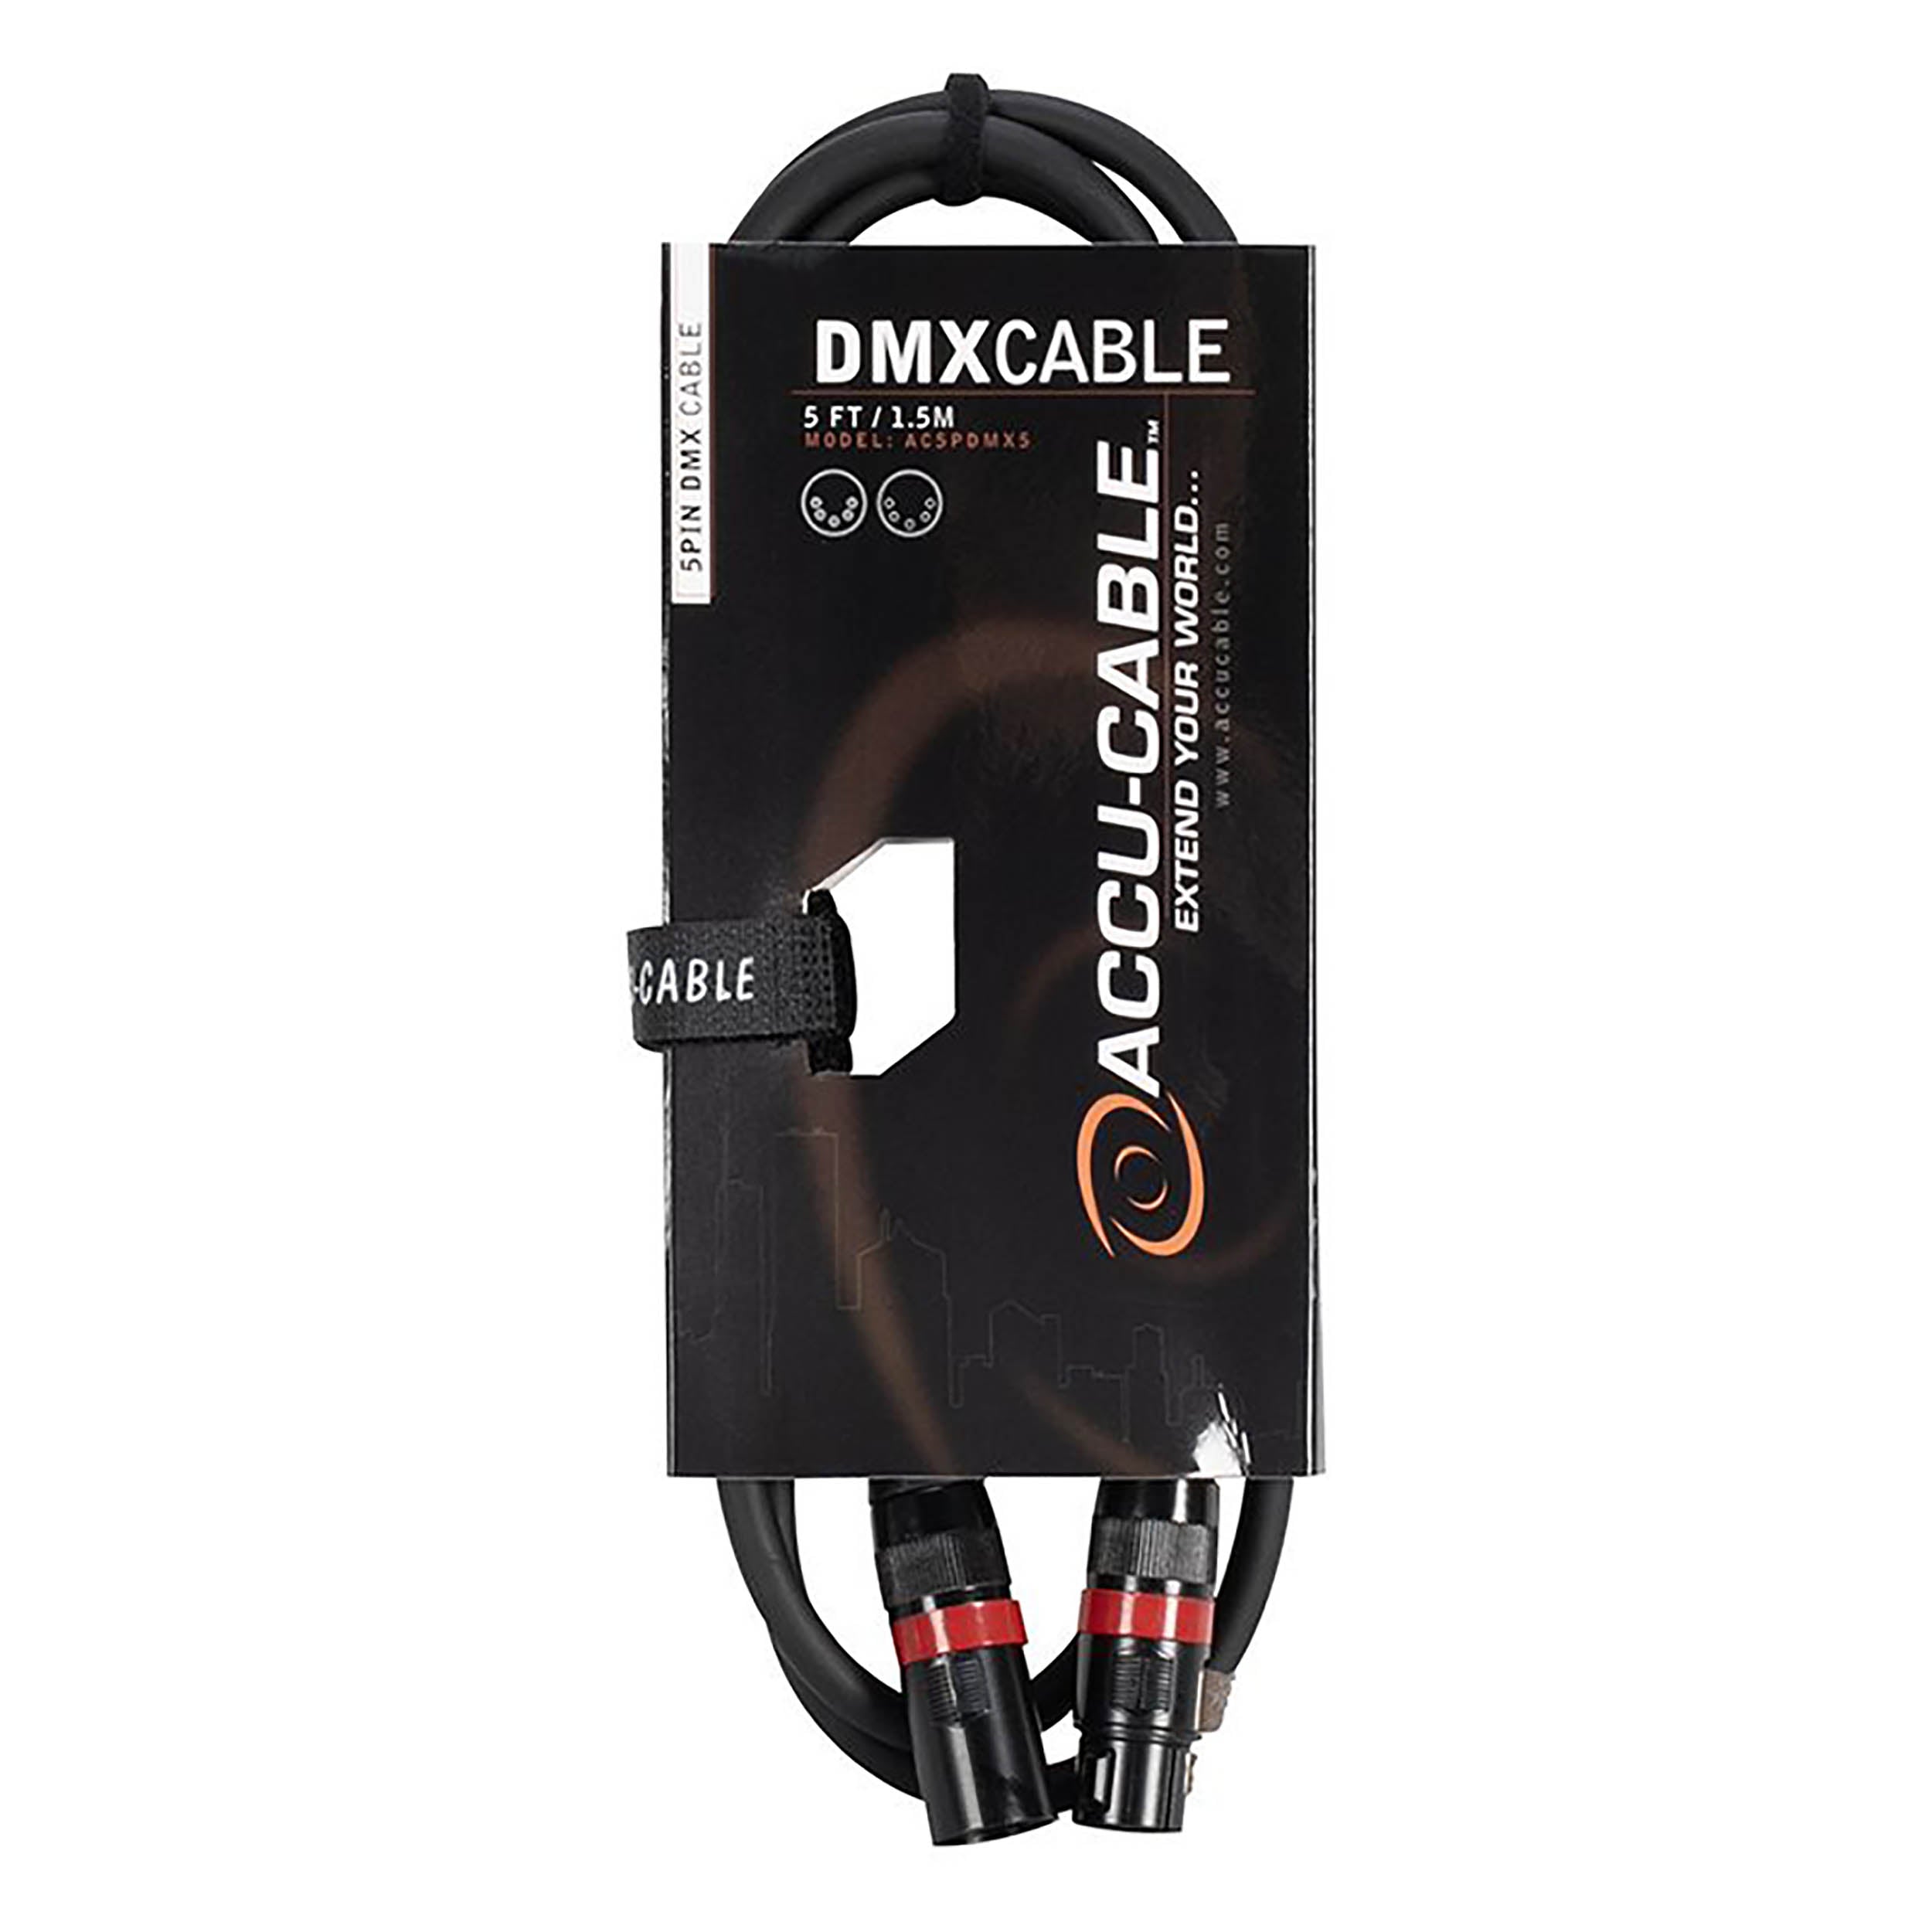 Accu-Cable AC5PDMX5, 5-Pin Male To 5-Pin Female Connection DMX Cable - 5 Ft by Accu Cable